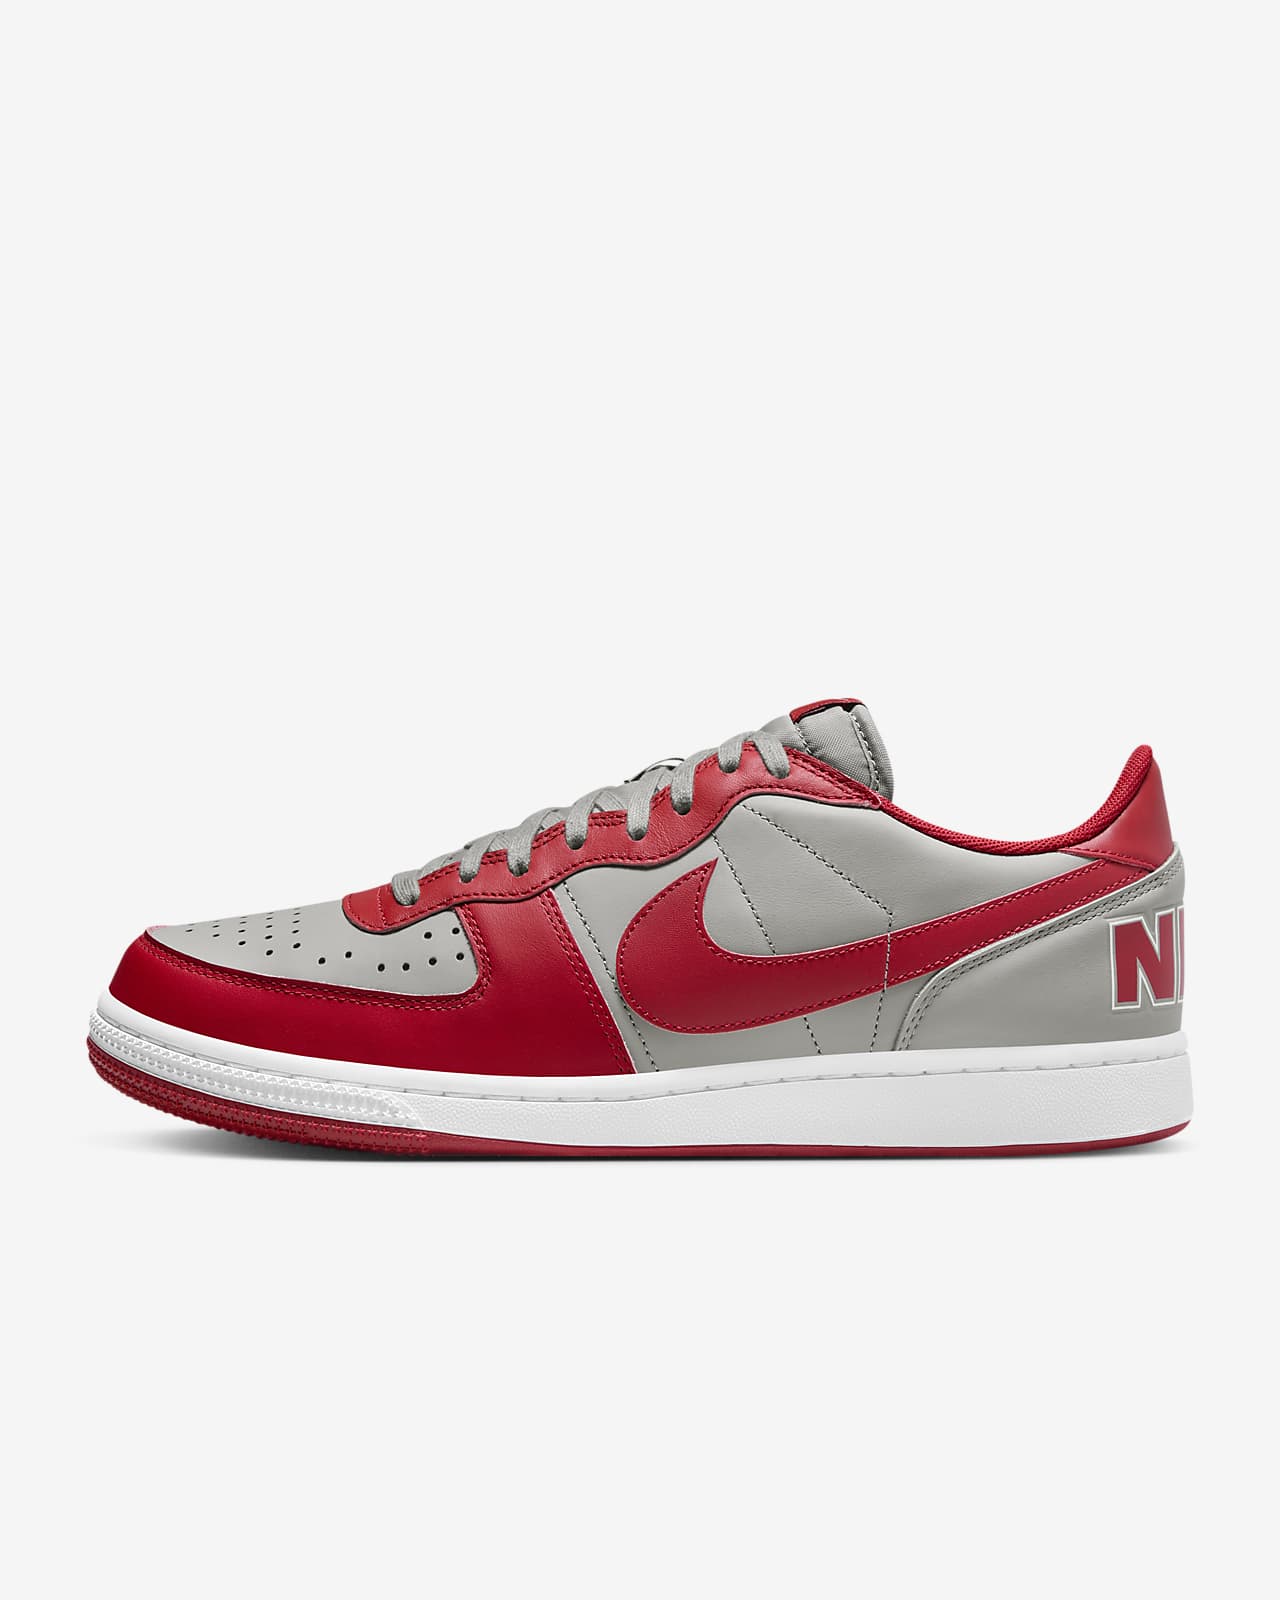 Chaussure Nike Terminator Low pour homme